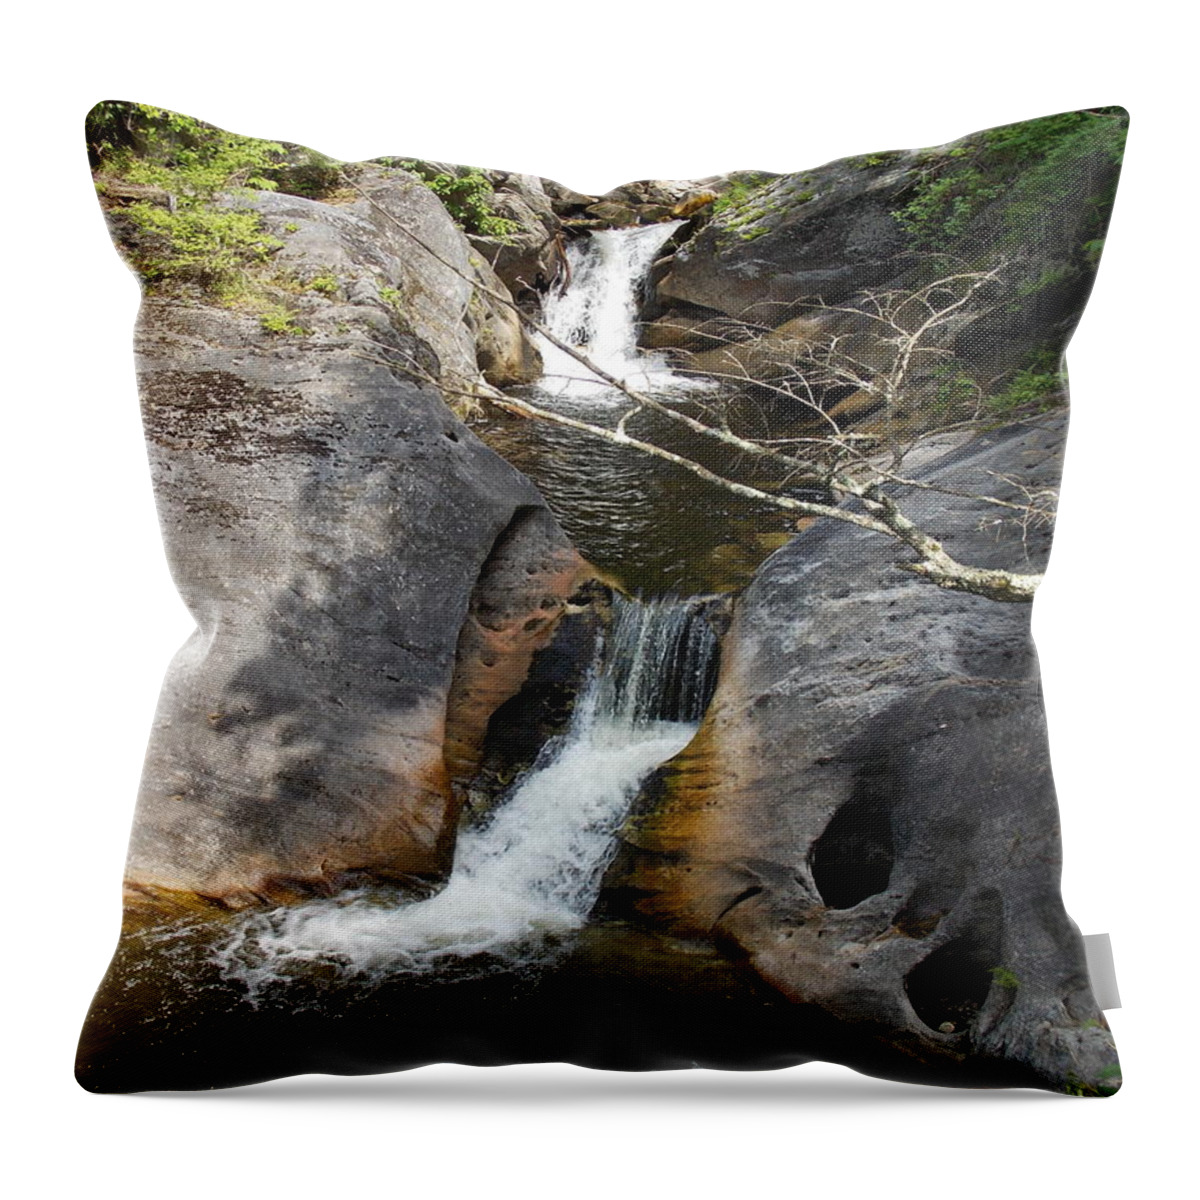 Middle Throw Pillow featuring the photograph Middle Kent Falls by Nina Kindred